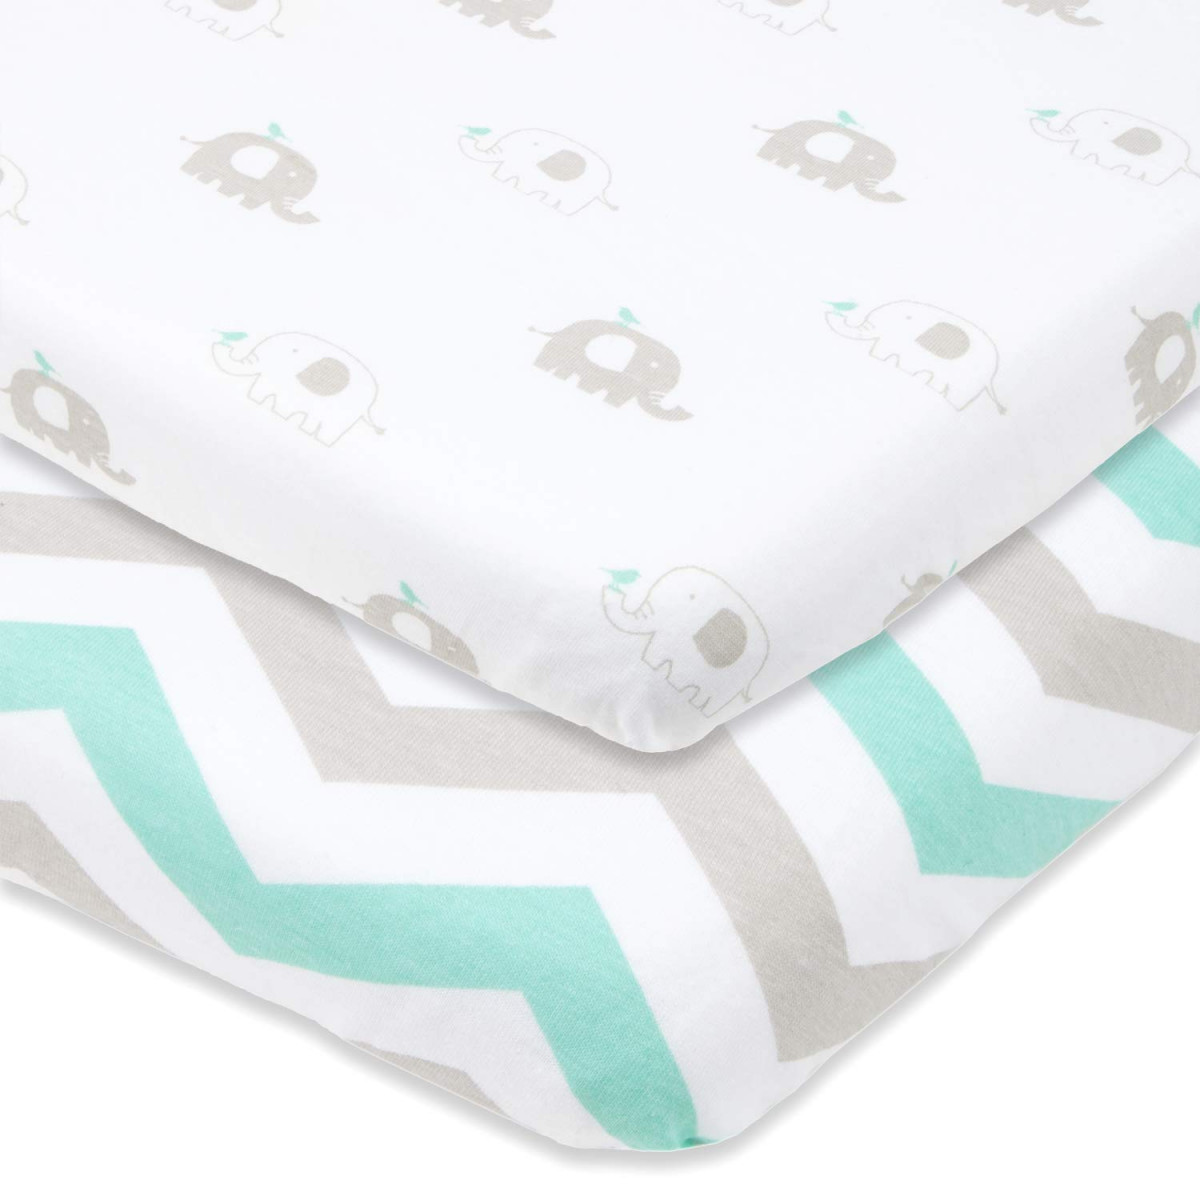 pack n play sheets